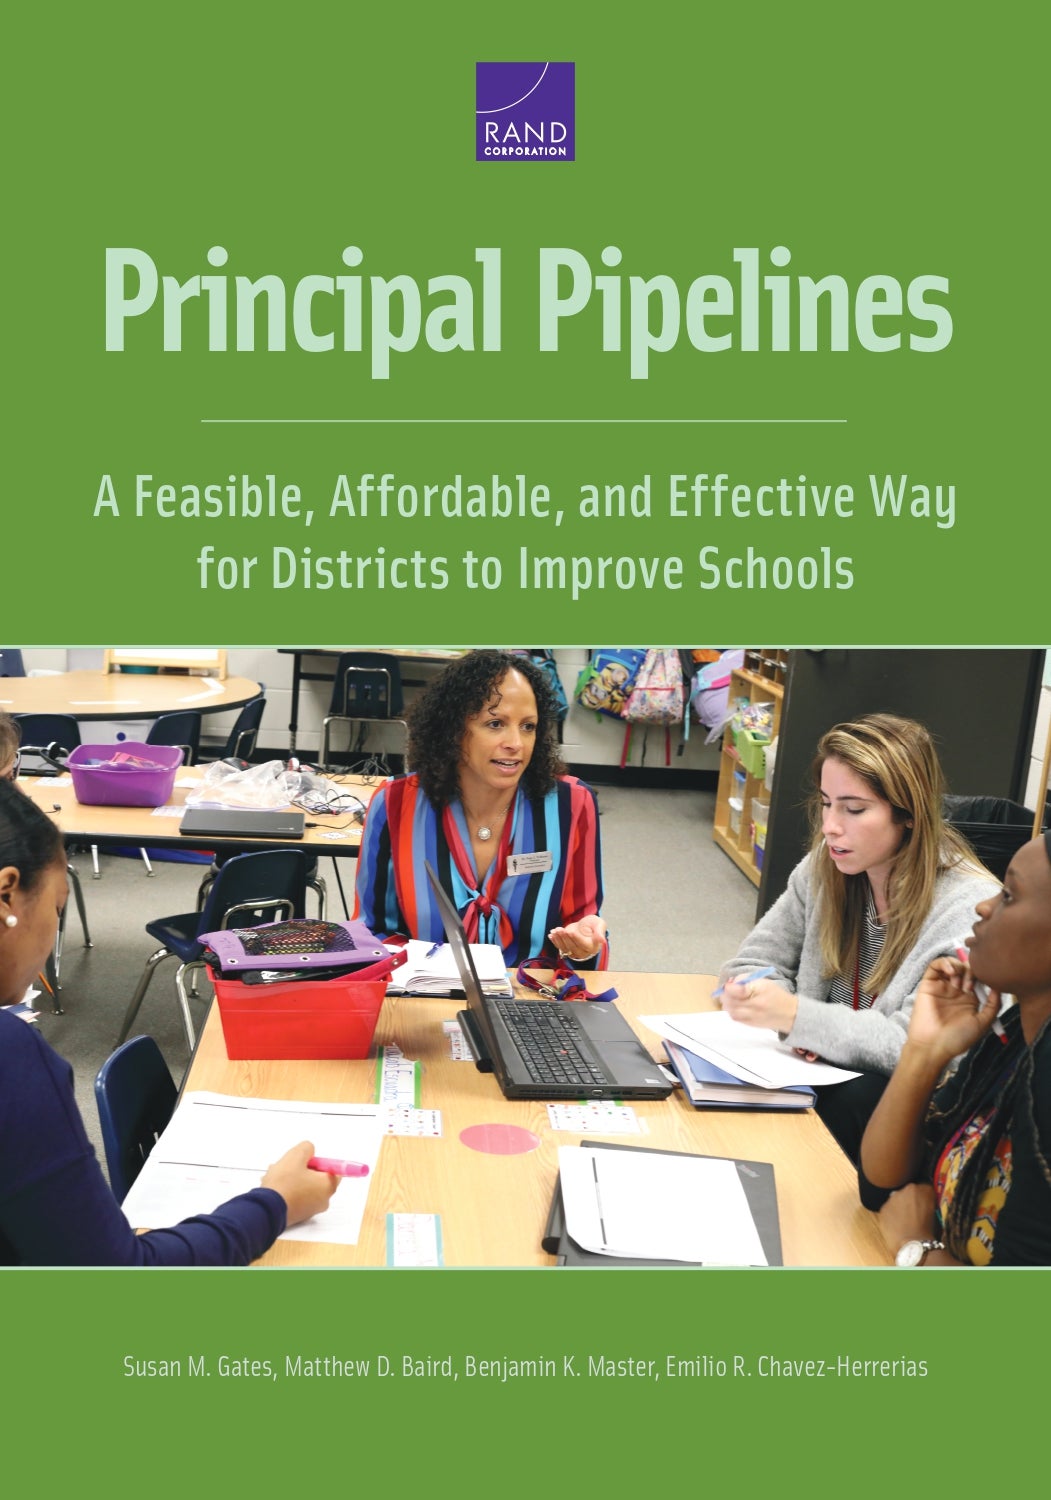 Principal Pipelines: A Feasible, Affordable, Effective Way for Districts to Improve Schools cover